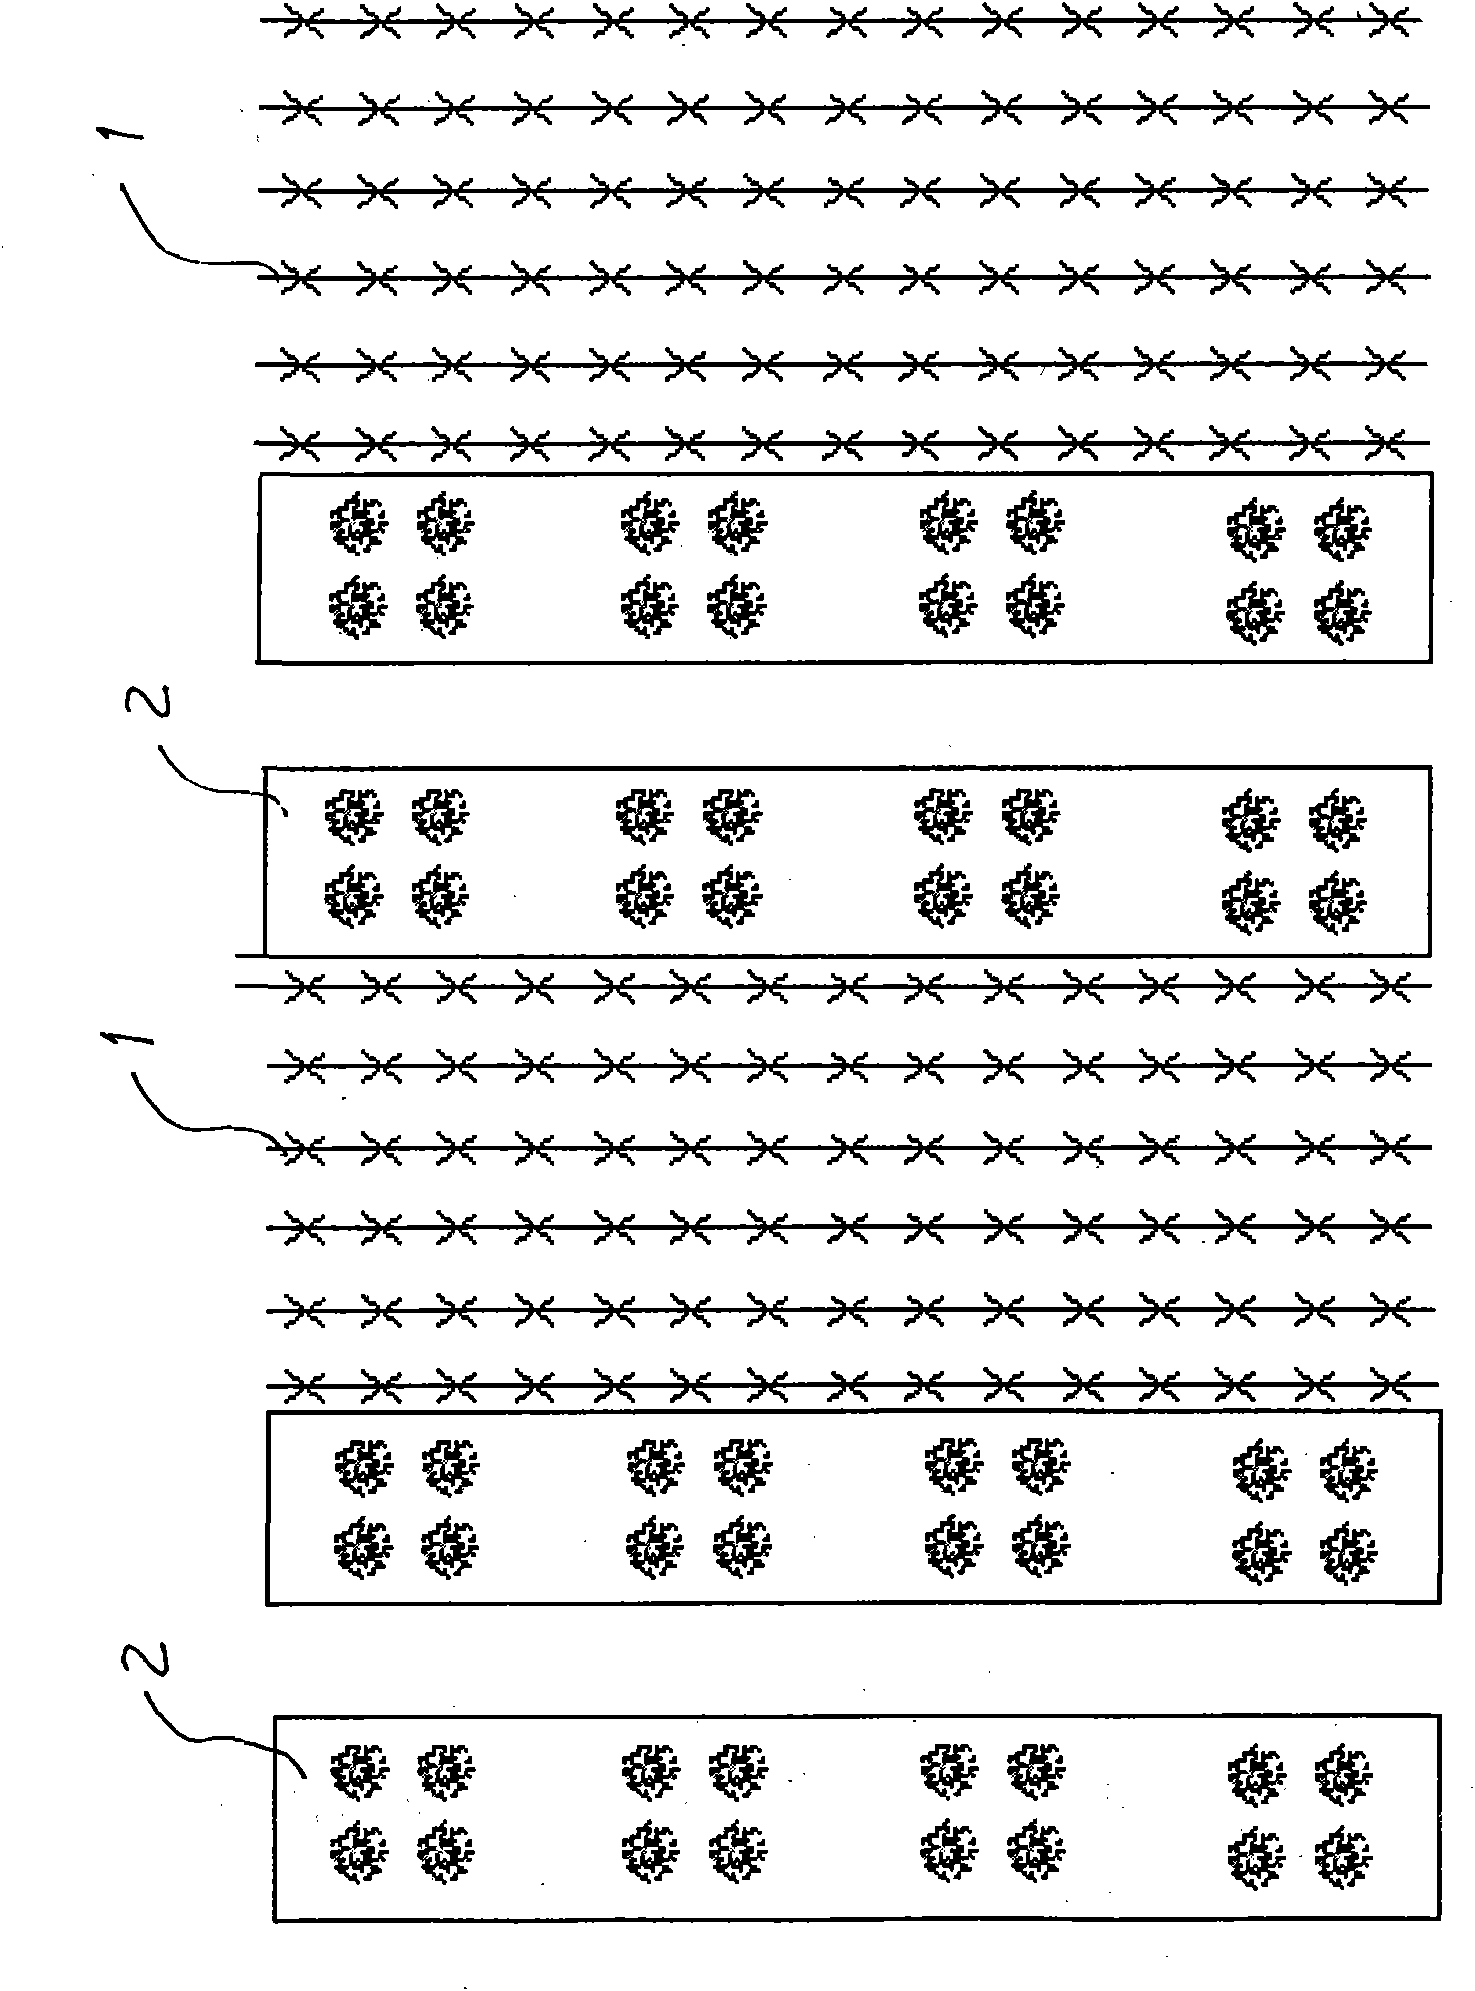 Method for alternating planting and cultivation